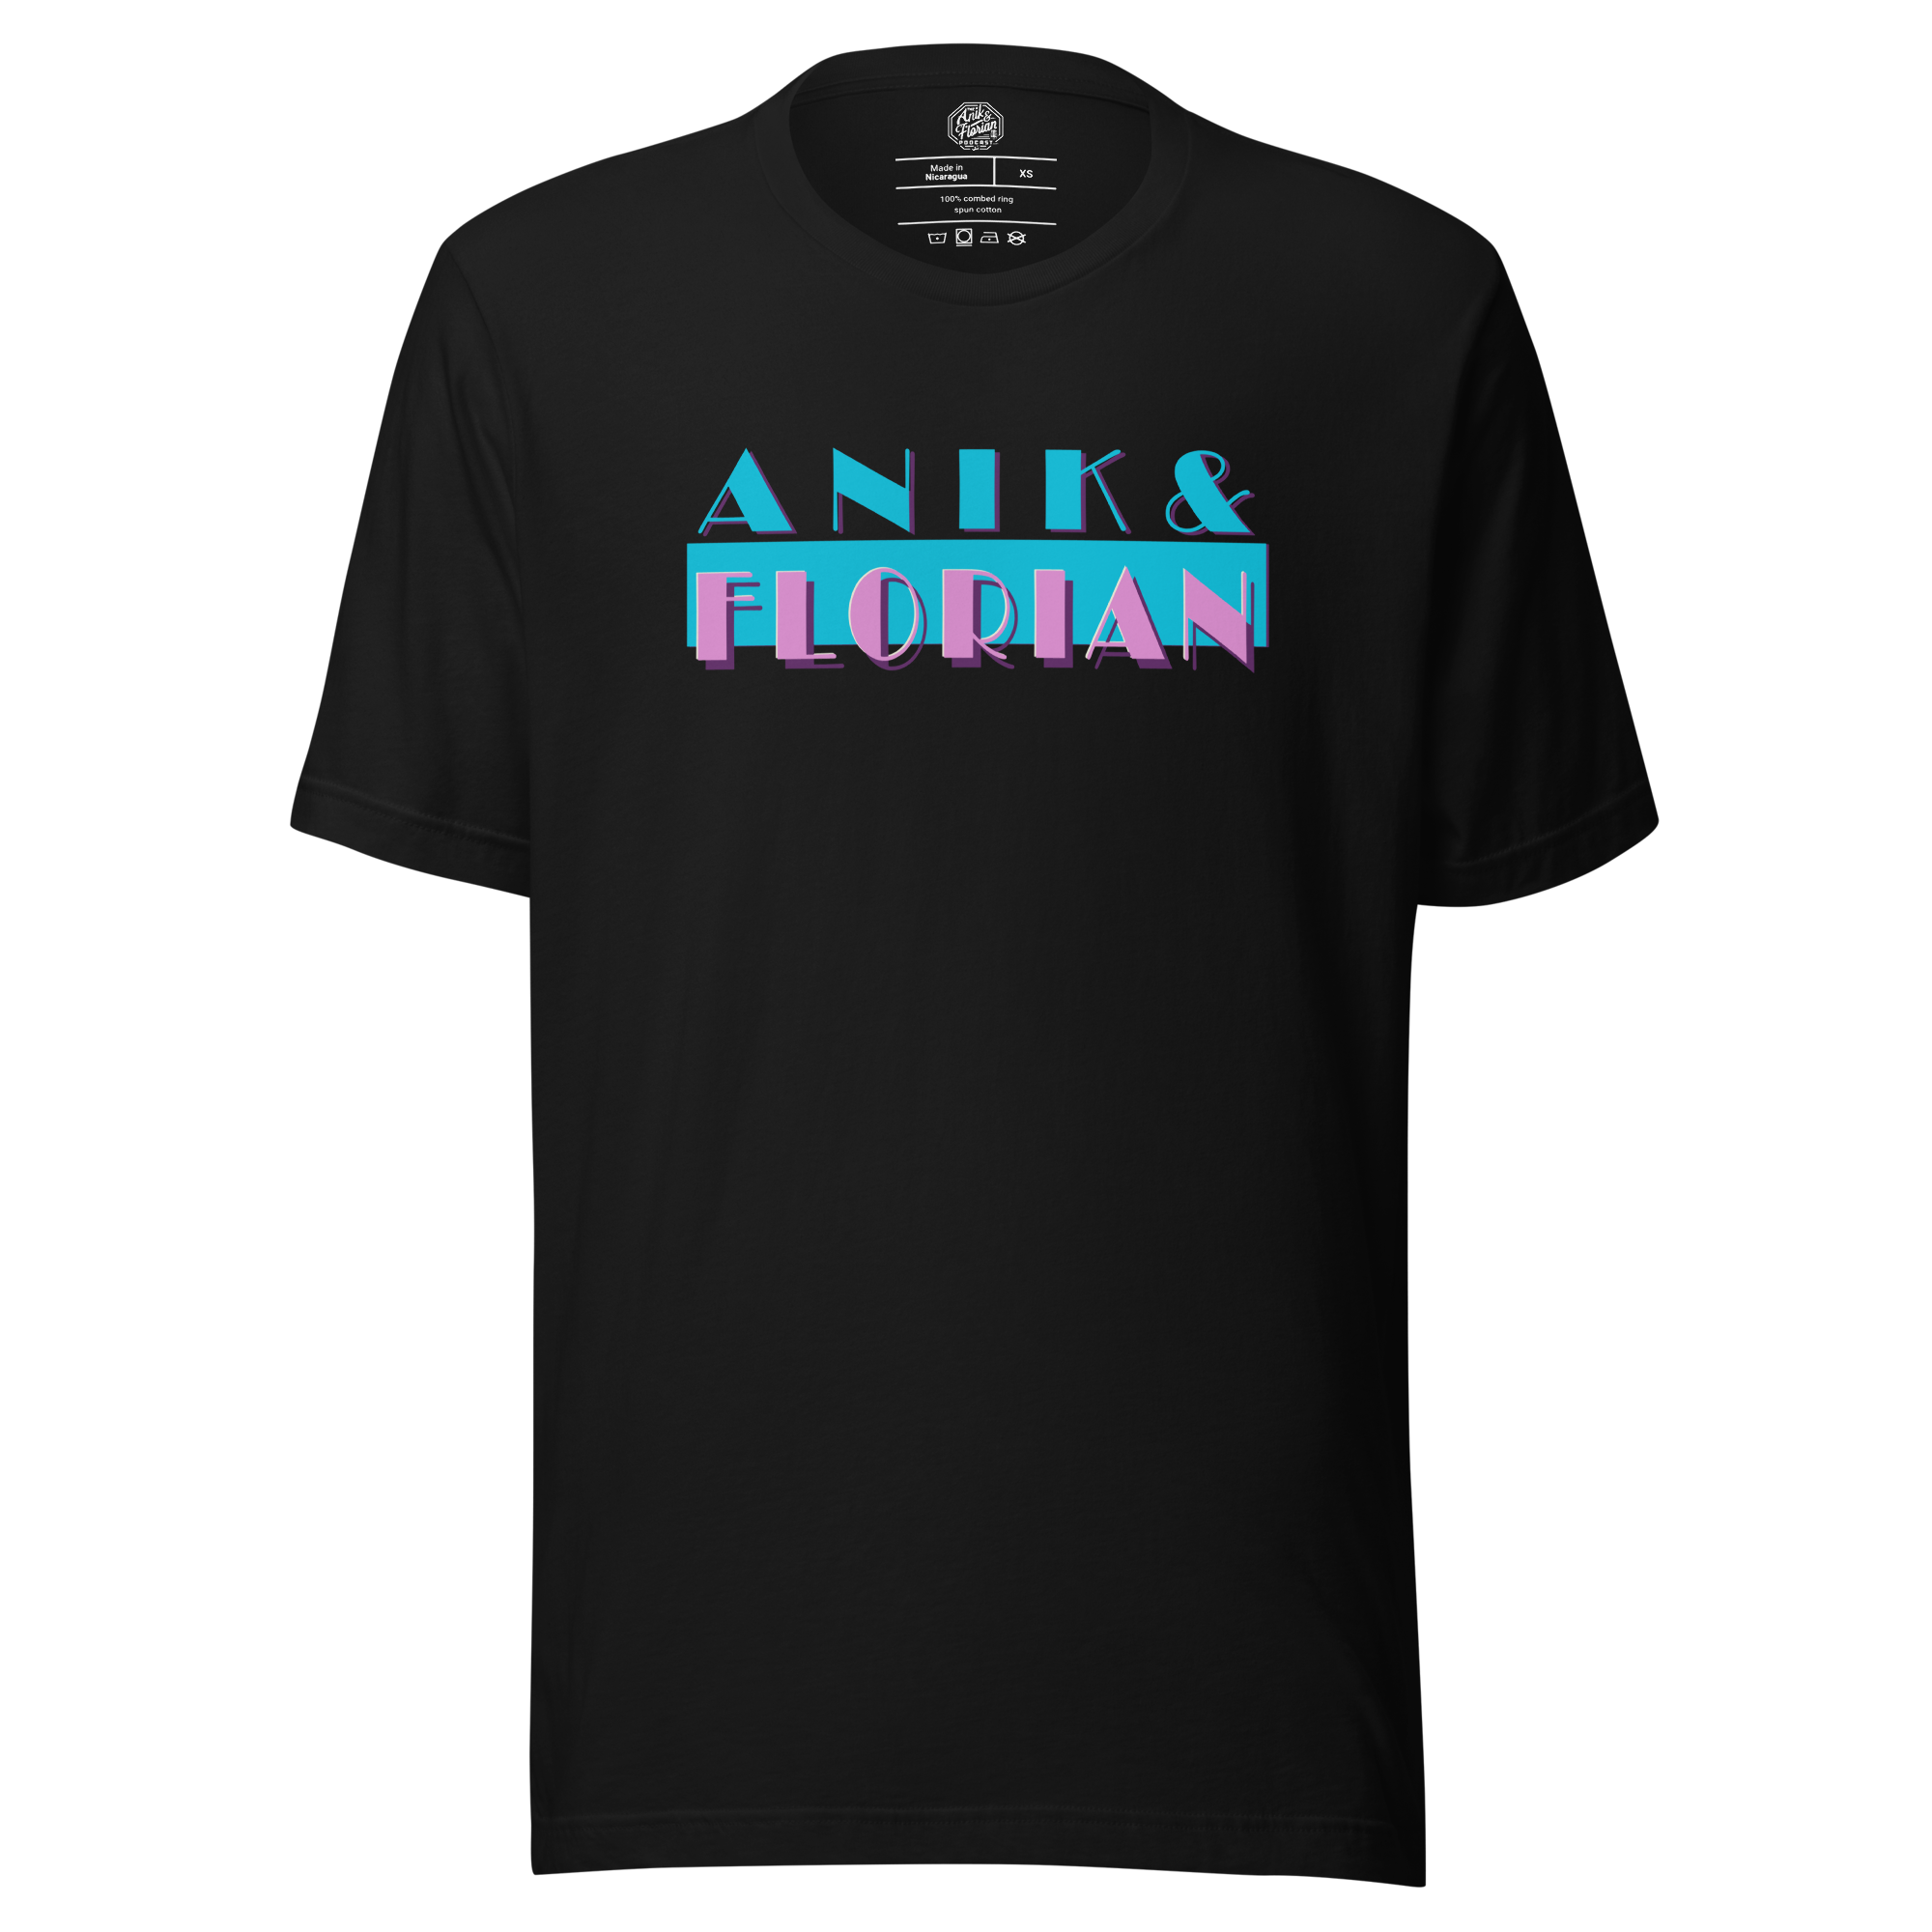 Anik & Florian Podcast Miami Vice inspired by Average Joe Art T-shirt in Black